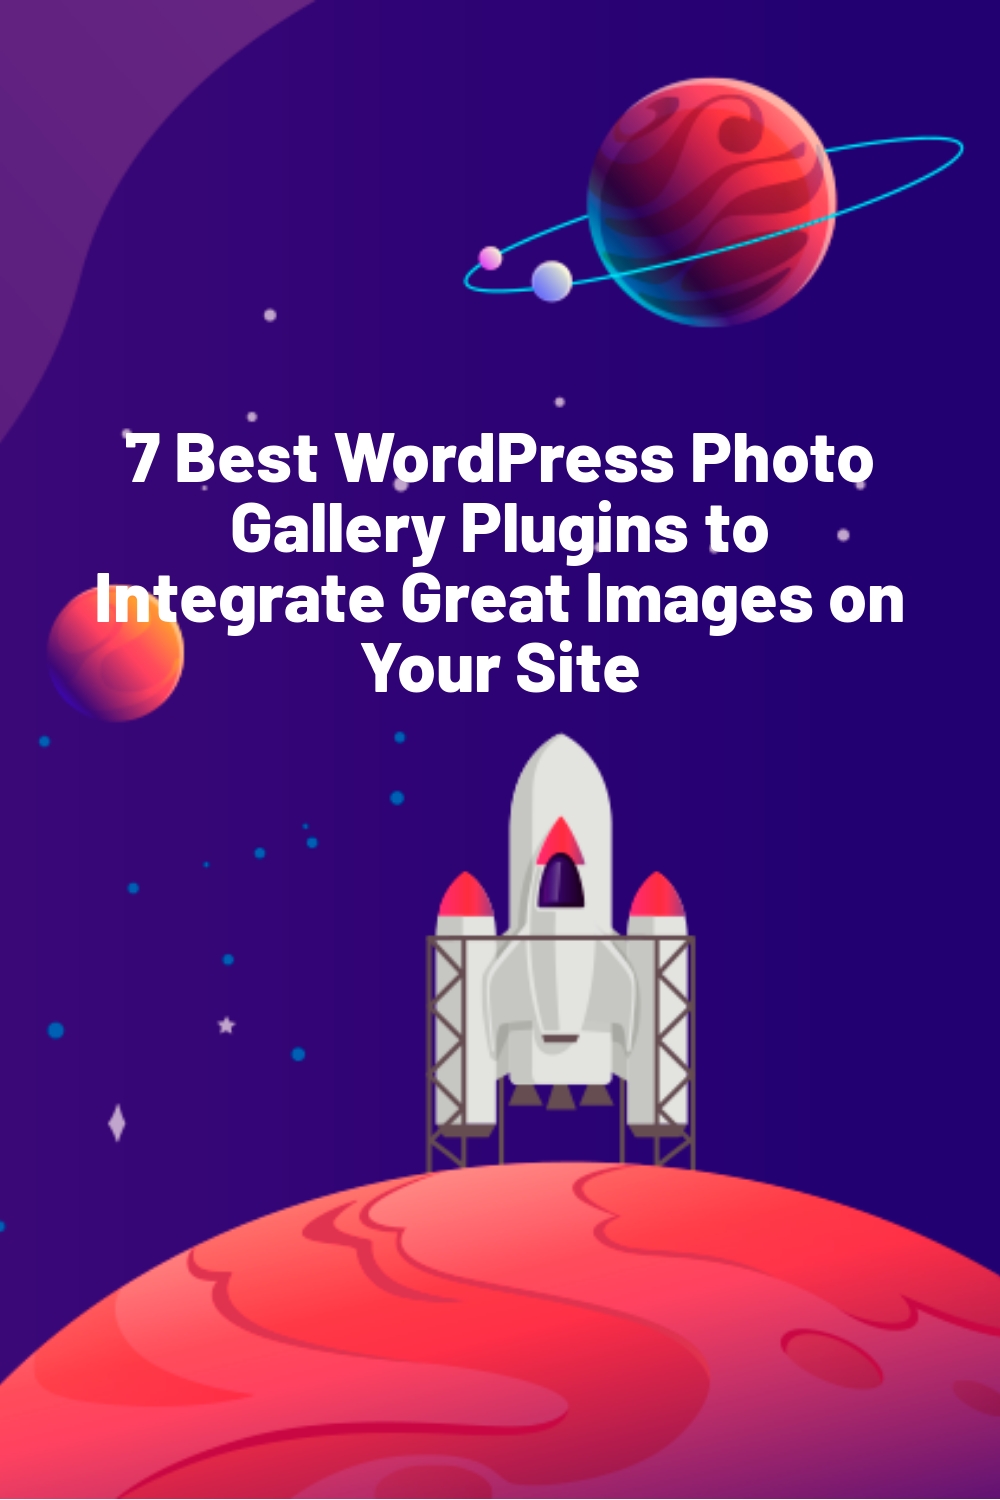 7 Best WordPress Photo Gallery Plugins to Integrate Great Images on Your Site